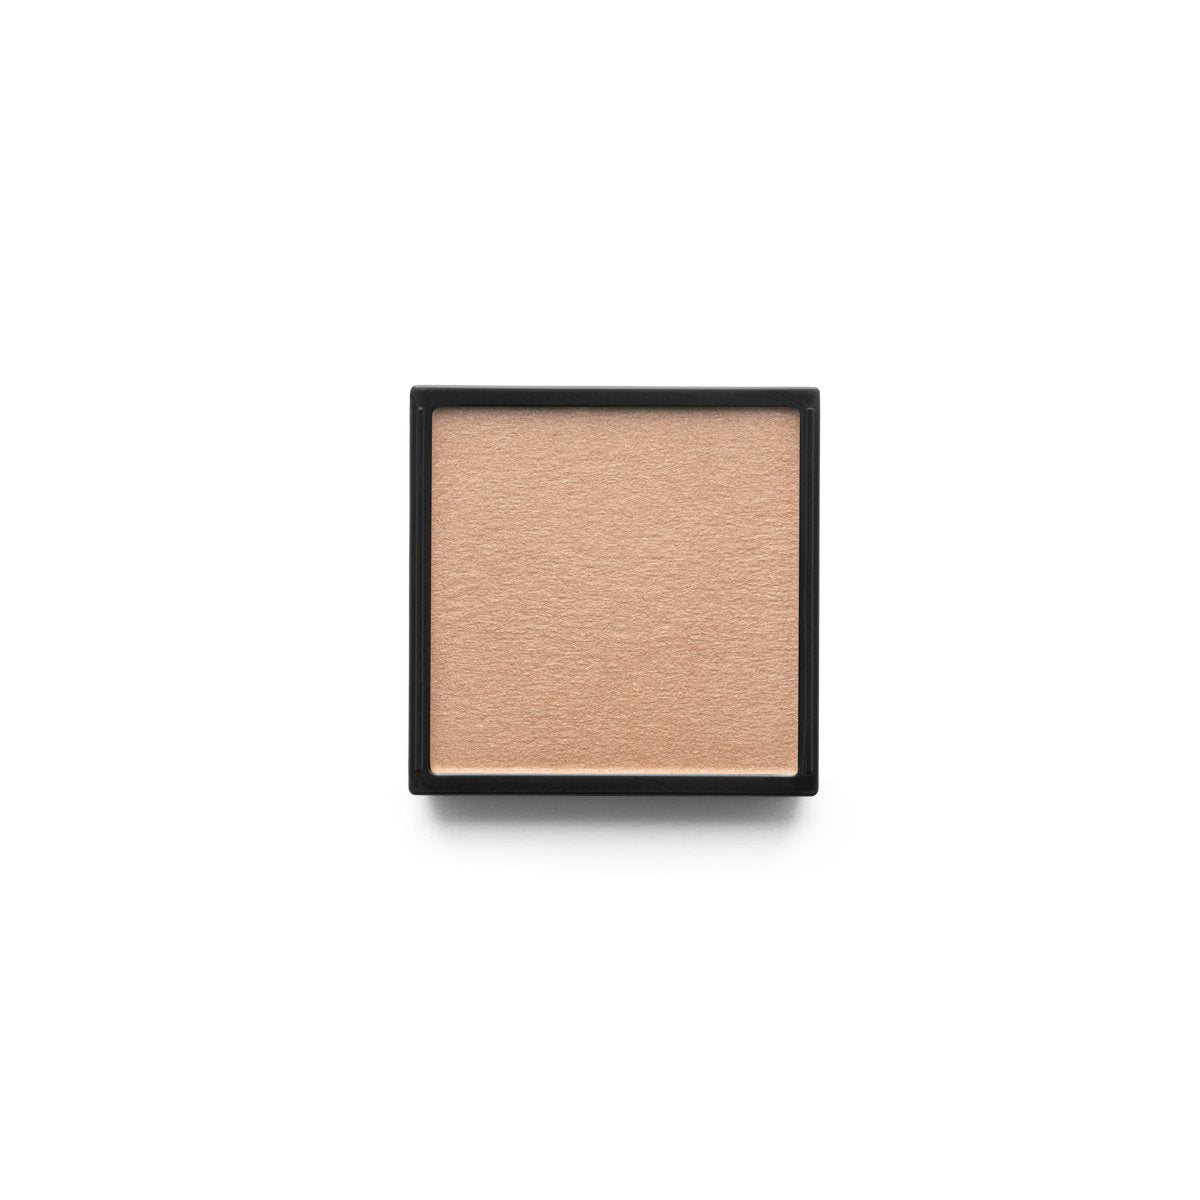 GRIEGE - MATTE GREY TAUPE - matte finish eyeshadow in grey taupe shade 